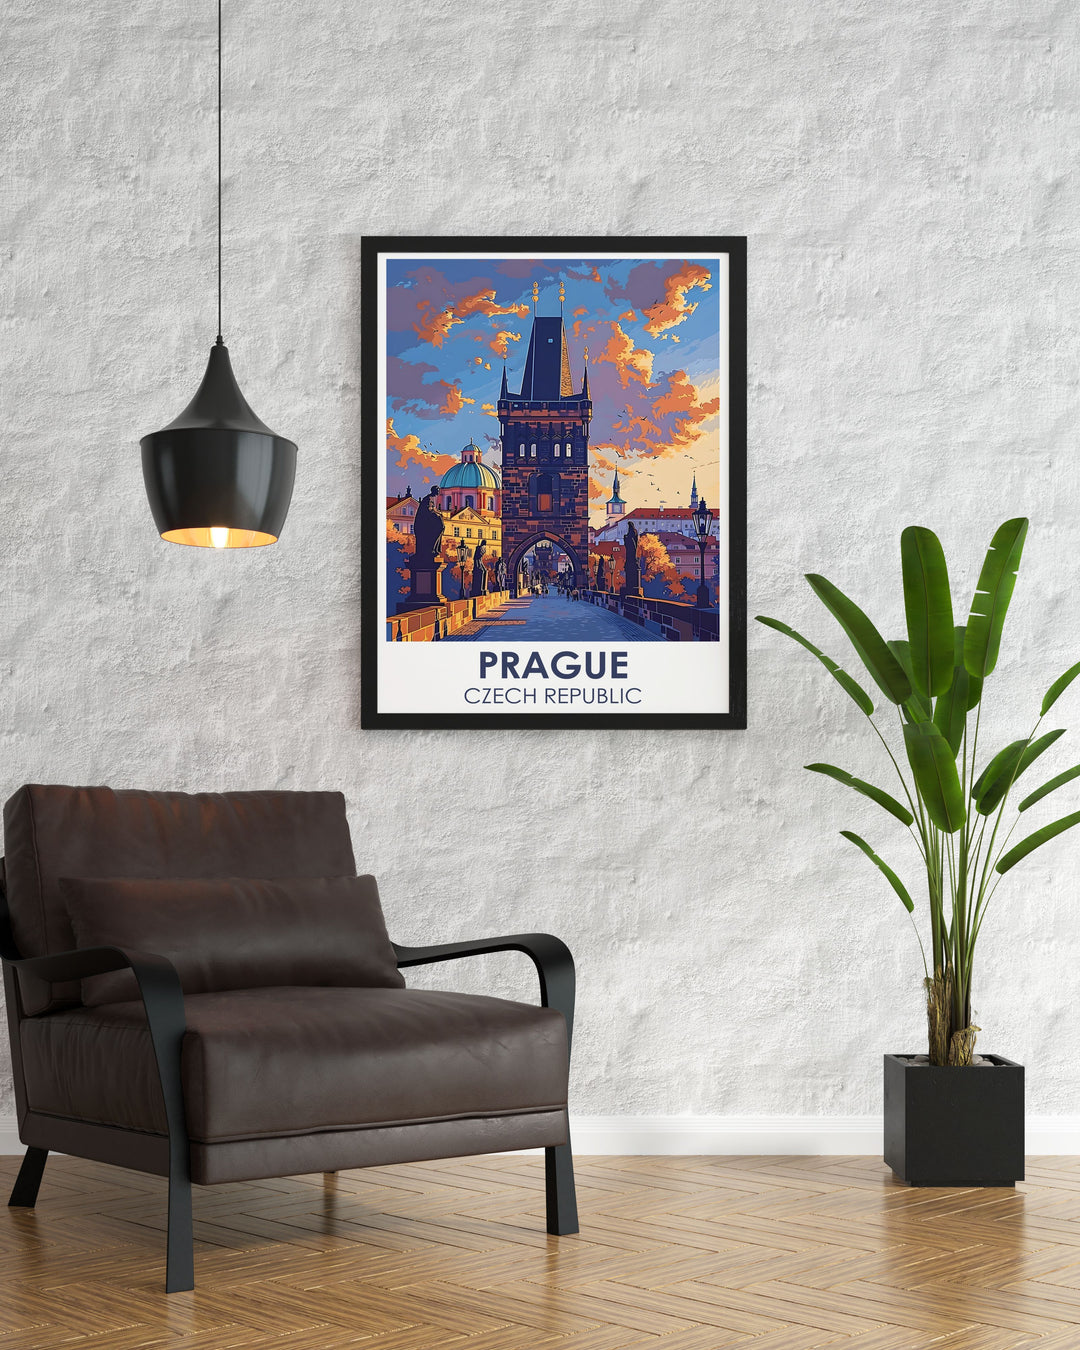 Charles Bridge Karluv Travel Poster featuring Pragues iconic landmark. This Prague Poster is a great addition to any home decor, capturing the beauty of the Czech Republic. Ideal for those who love Prague Wall Art and Travel Prints.